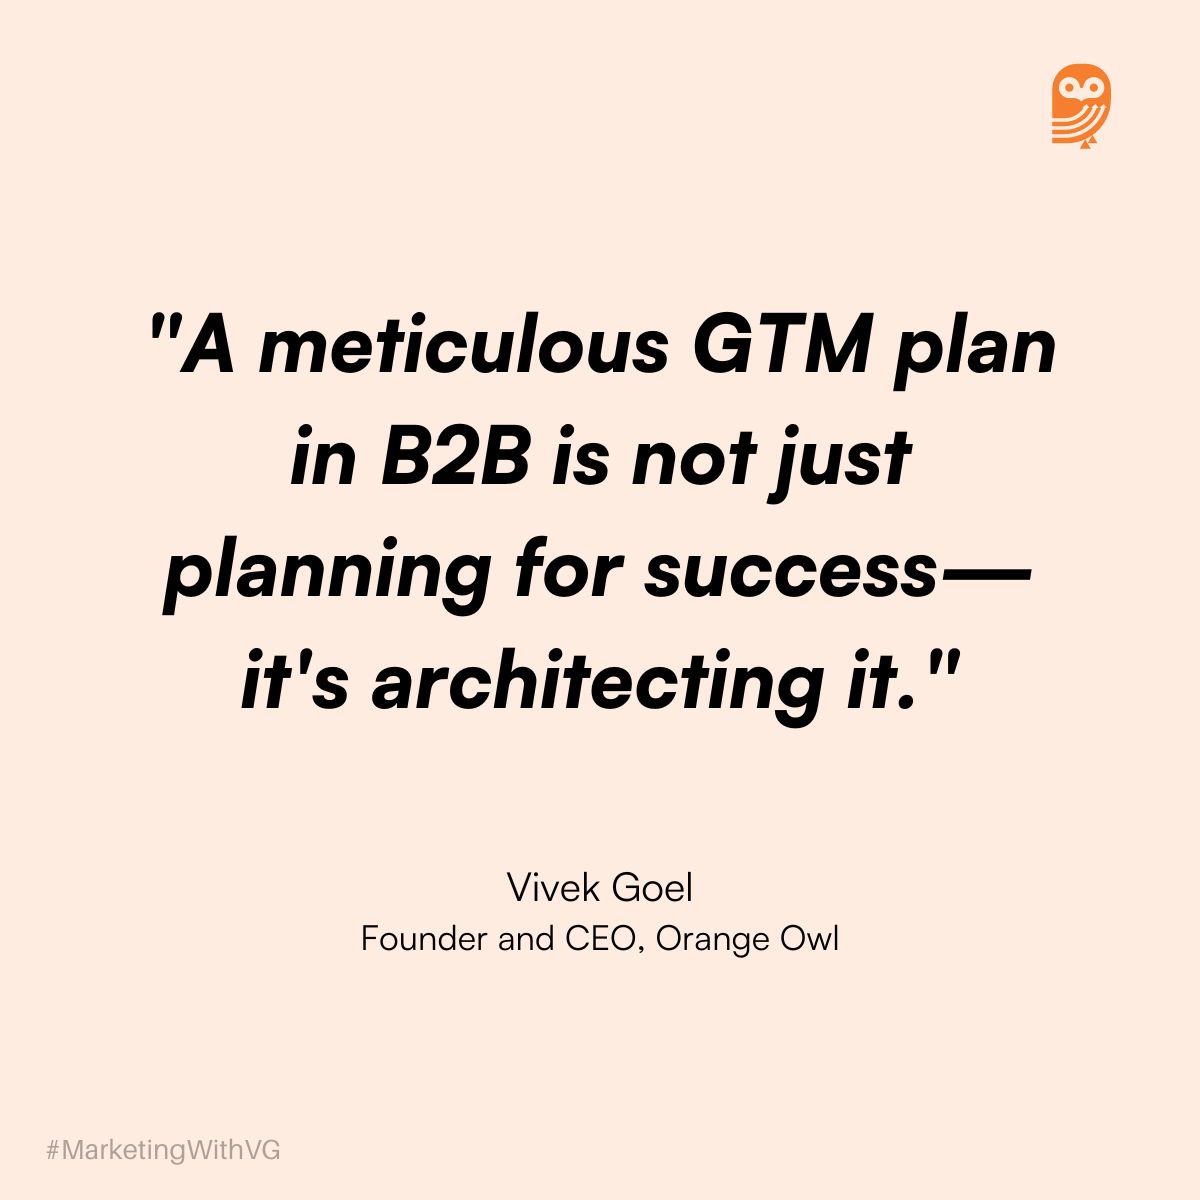 Quotes by vivek on GTM Plan 